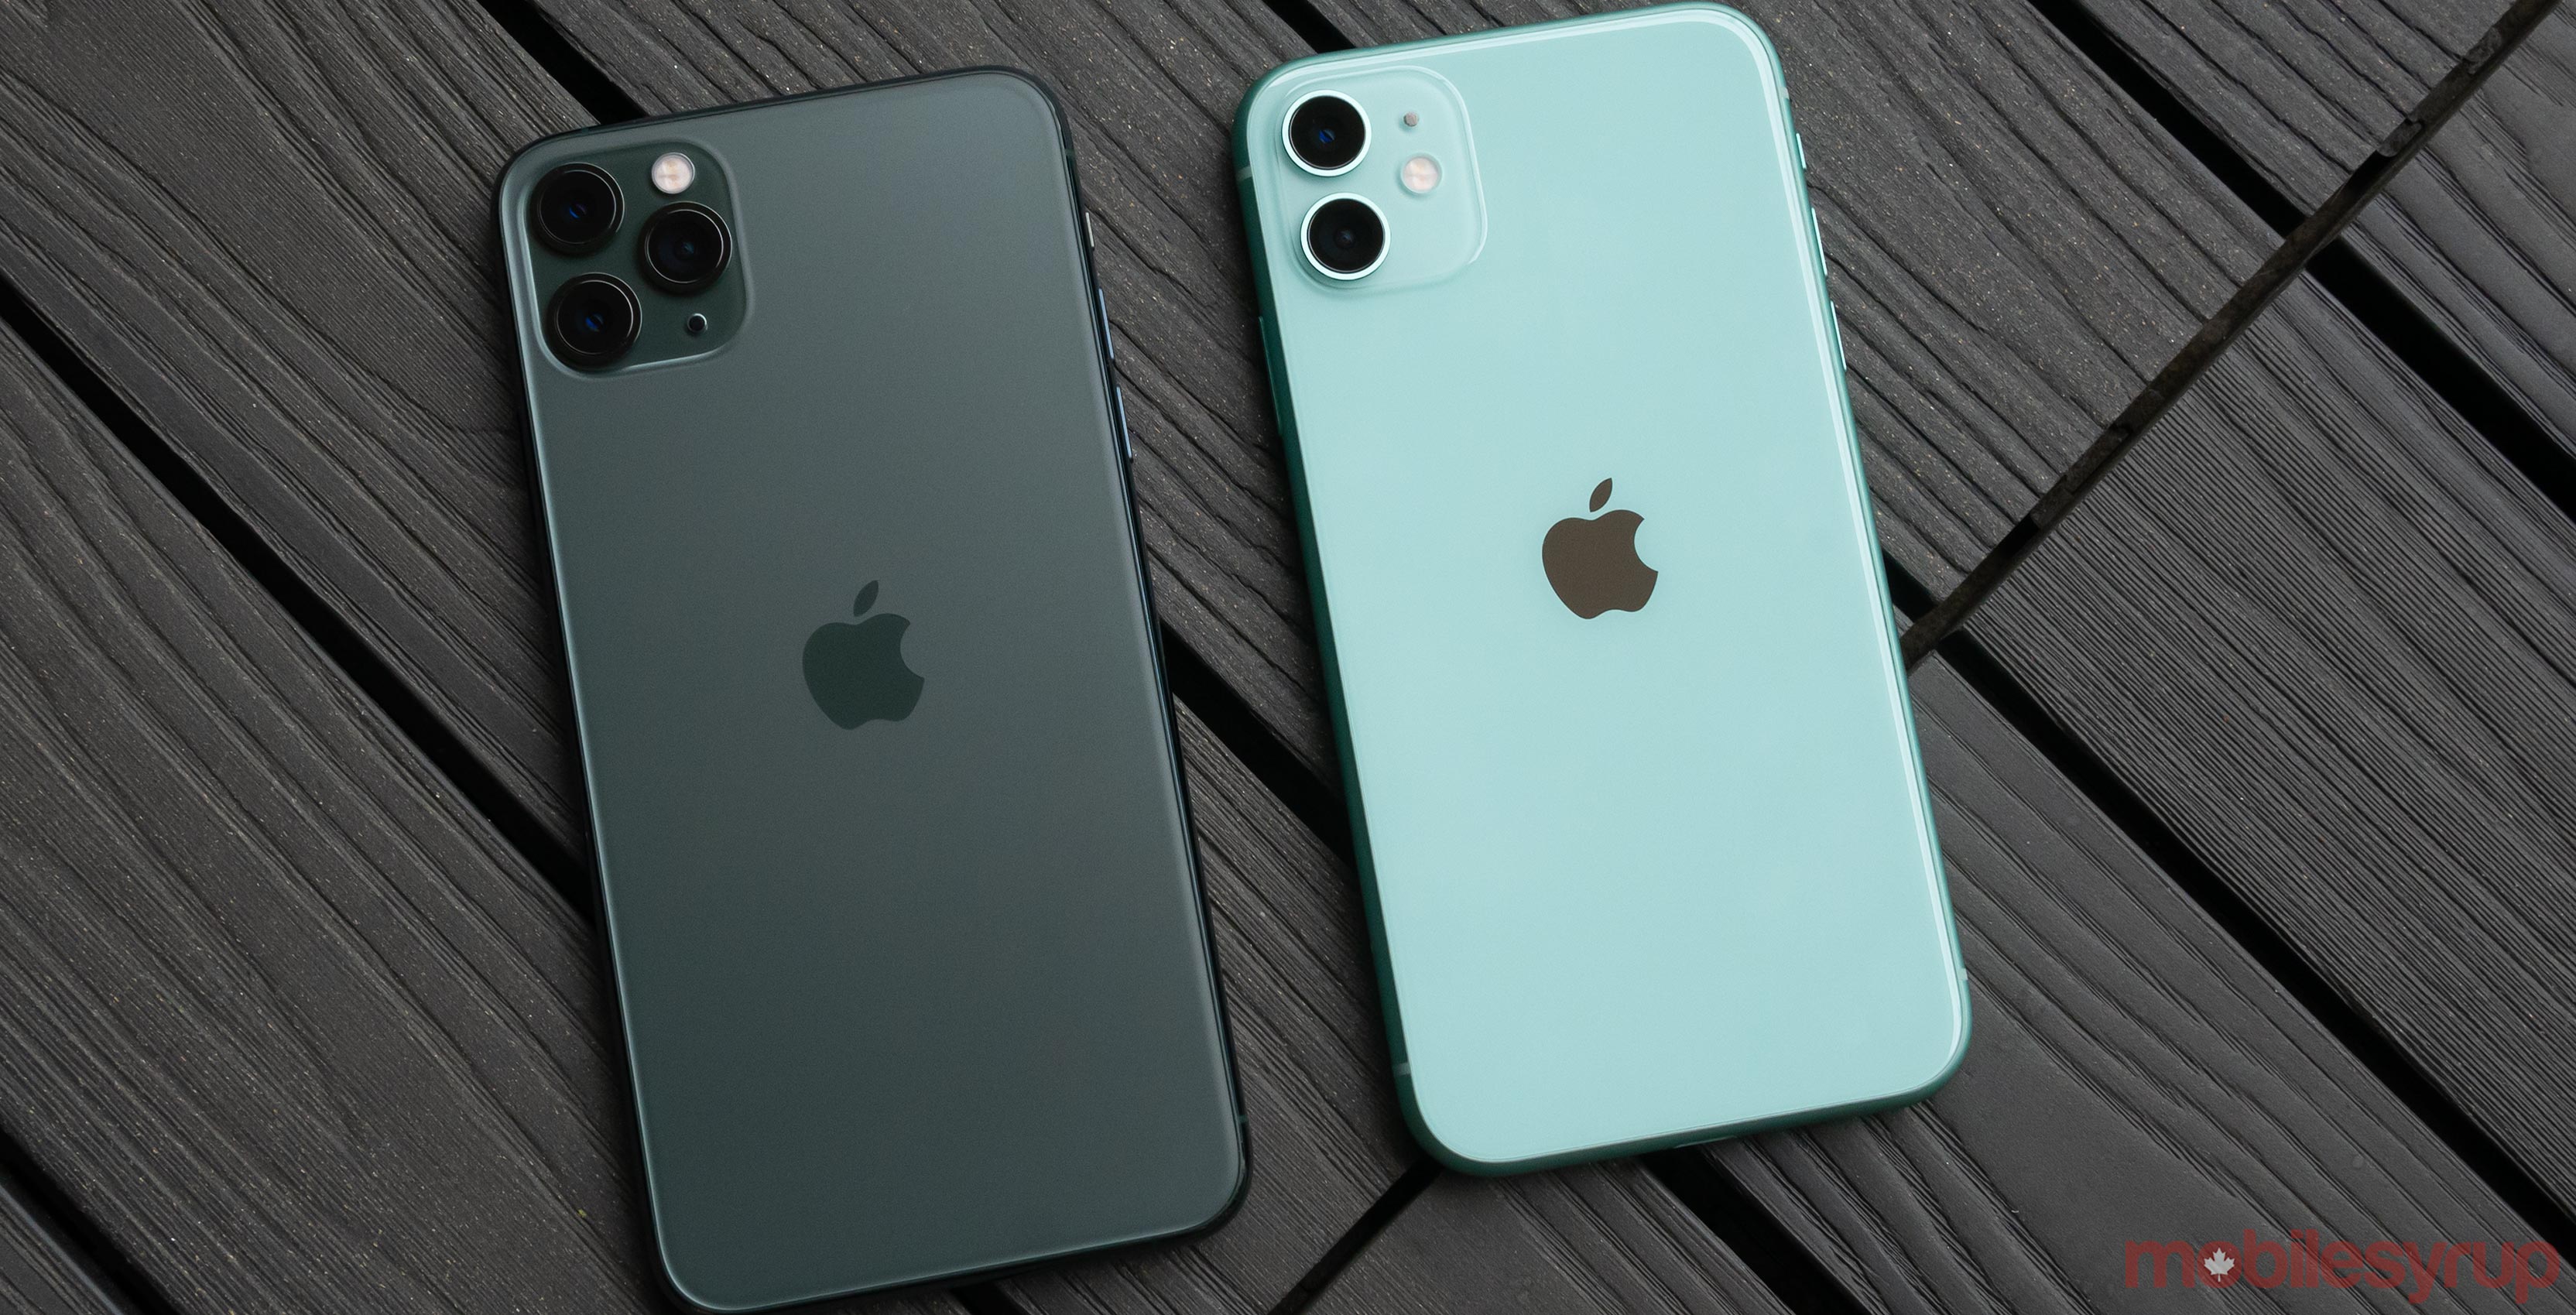 iPhone 11 Pro Max and iPhone 11